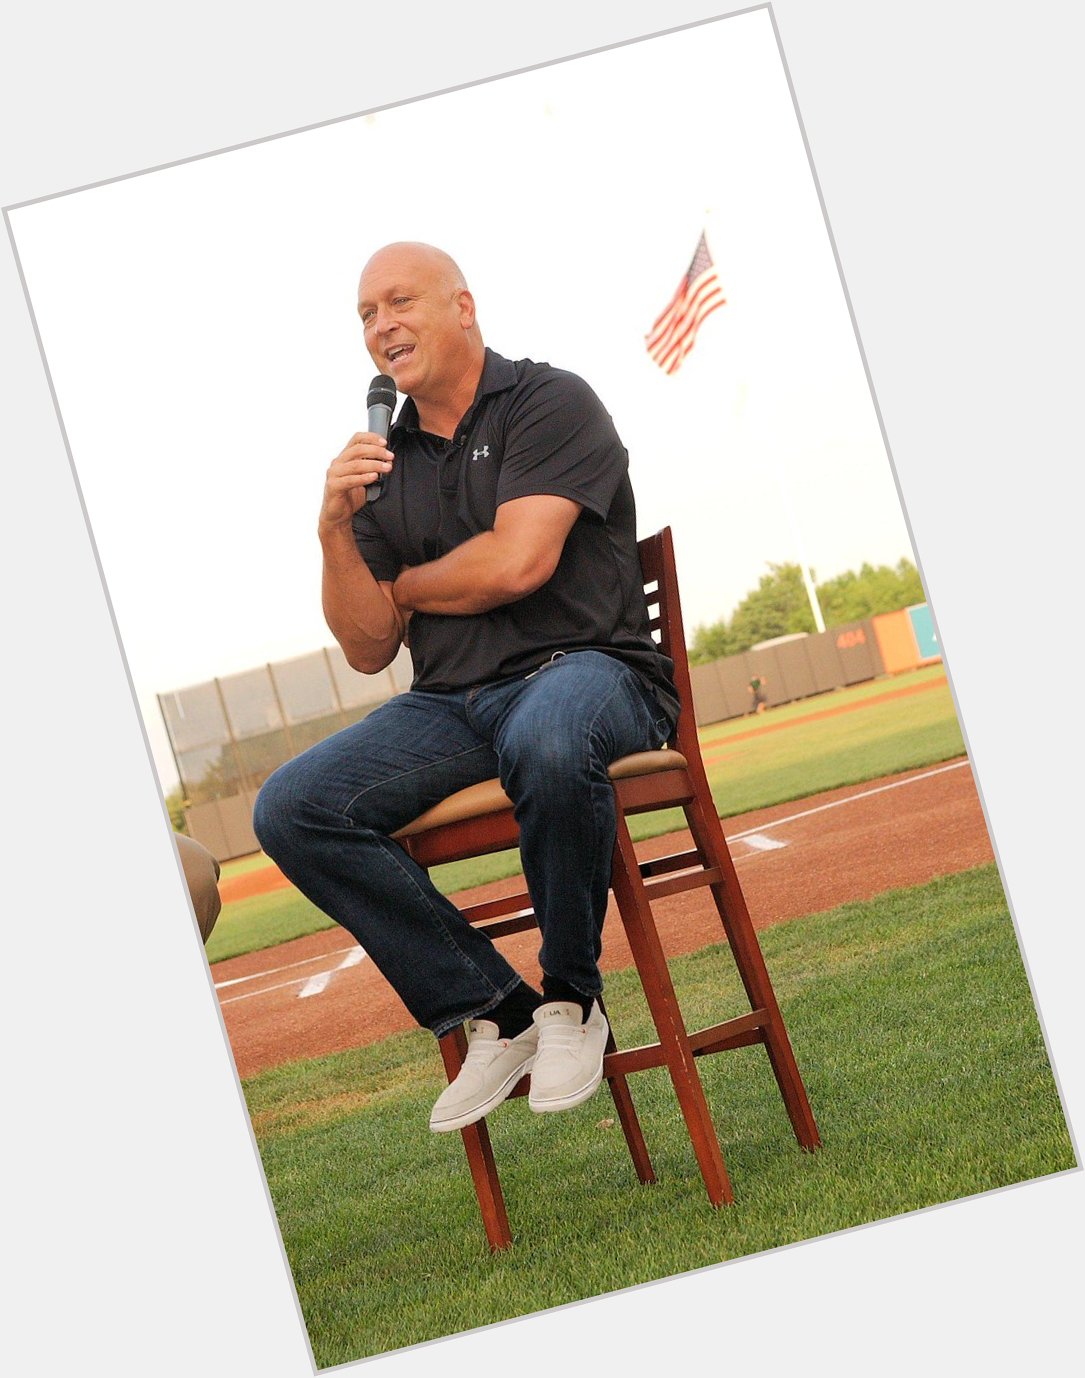 Everyone here at the Aberdeen IronBirds would like to wish Cal Ripken Jr. a very special happy birthday today! 